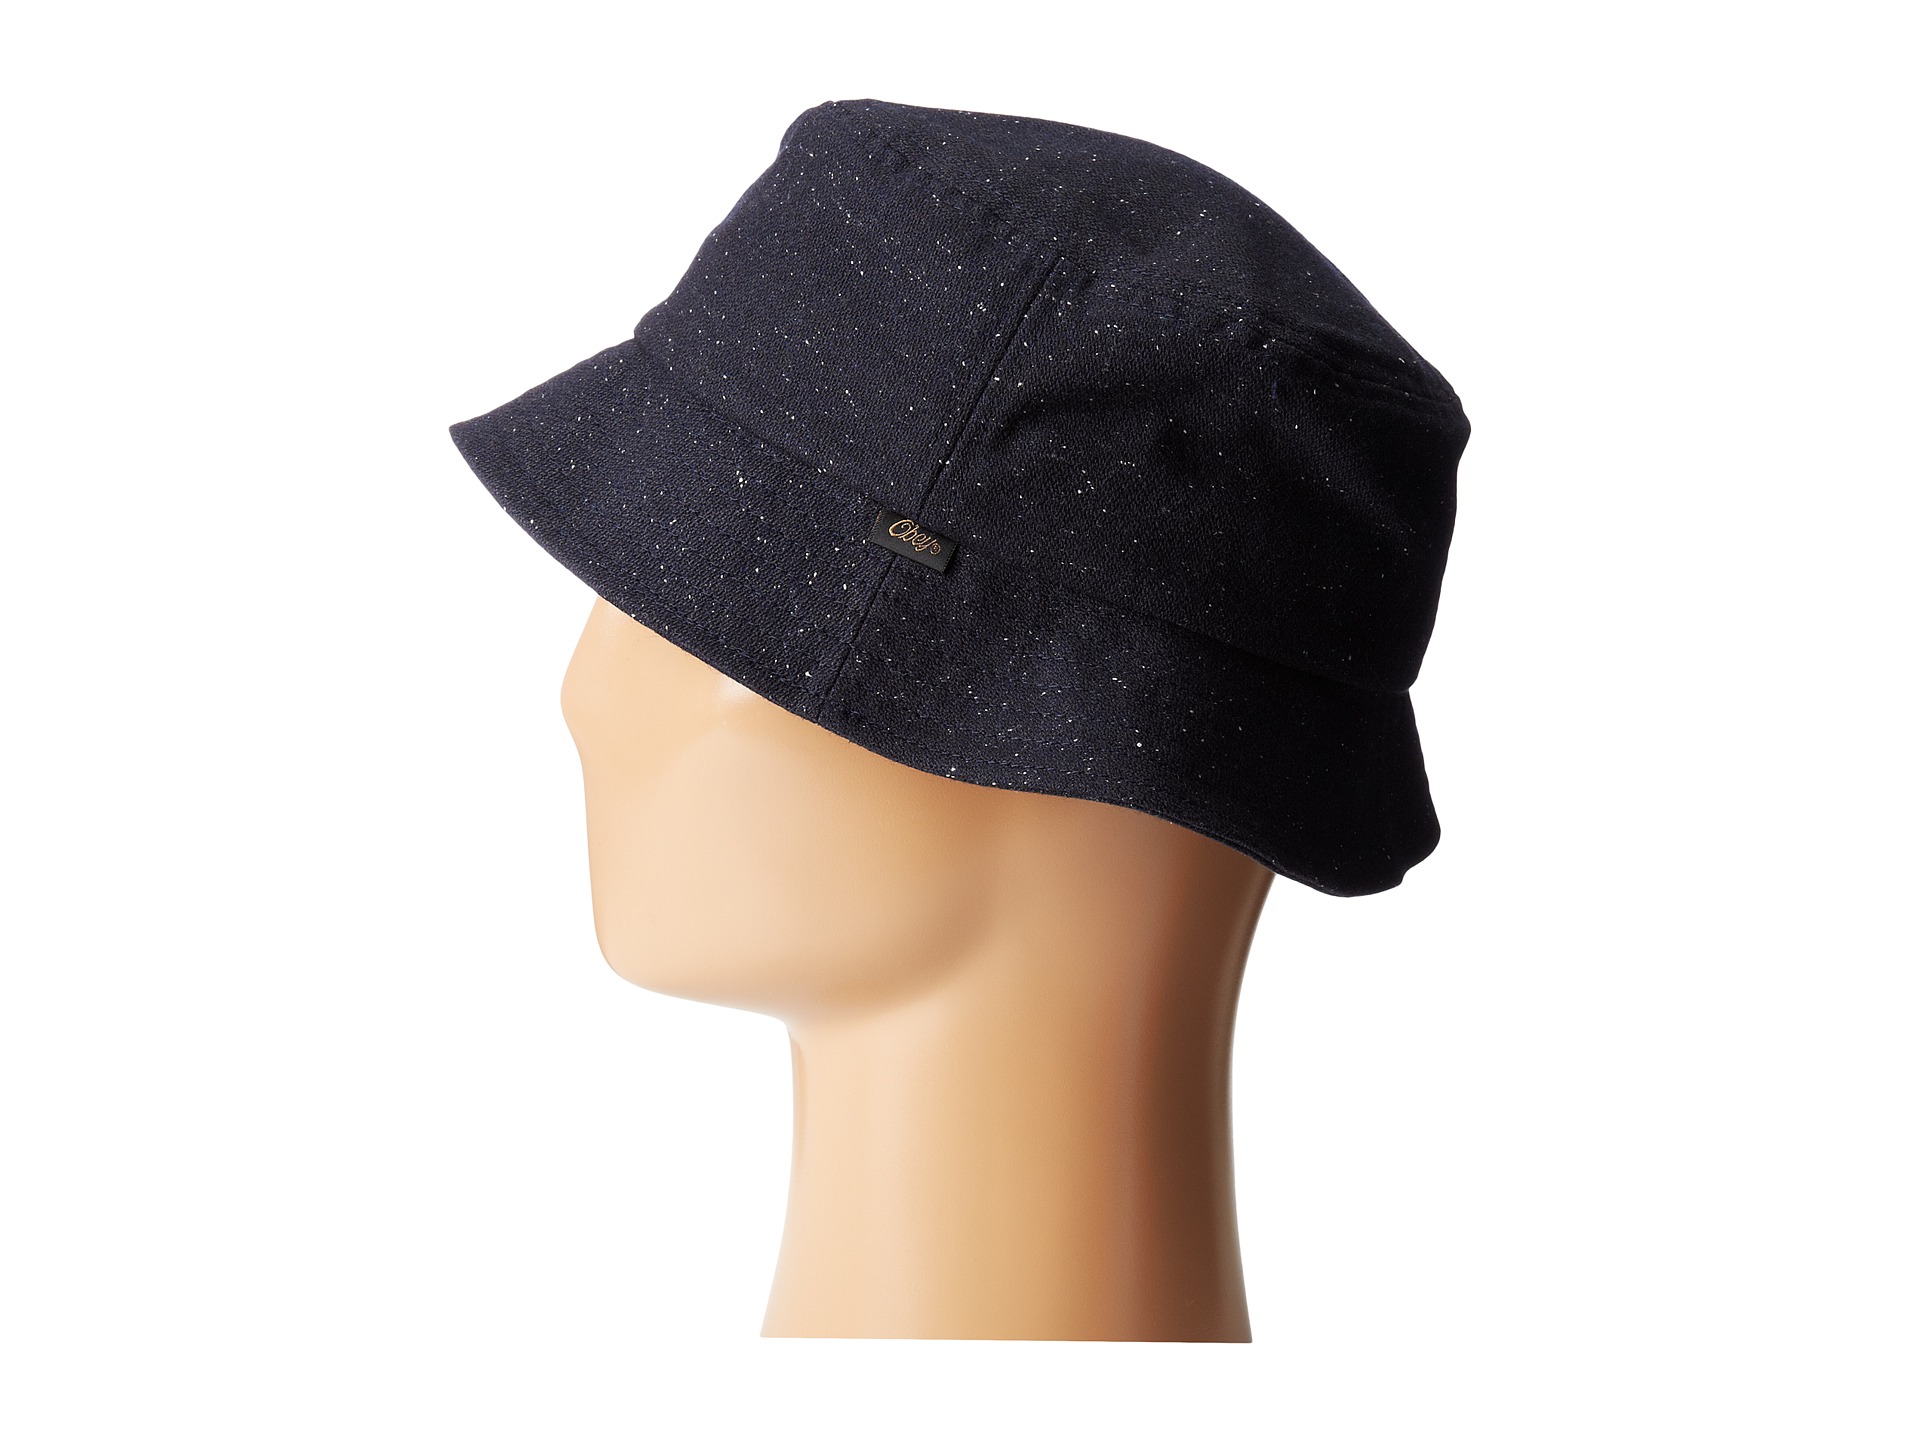 Obey Bangor Bucket Hat, Accessories | Shipped Free at Zappos